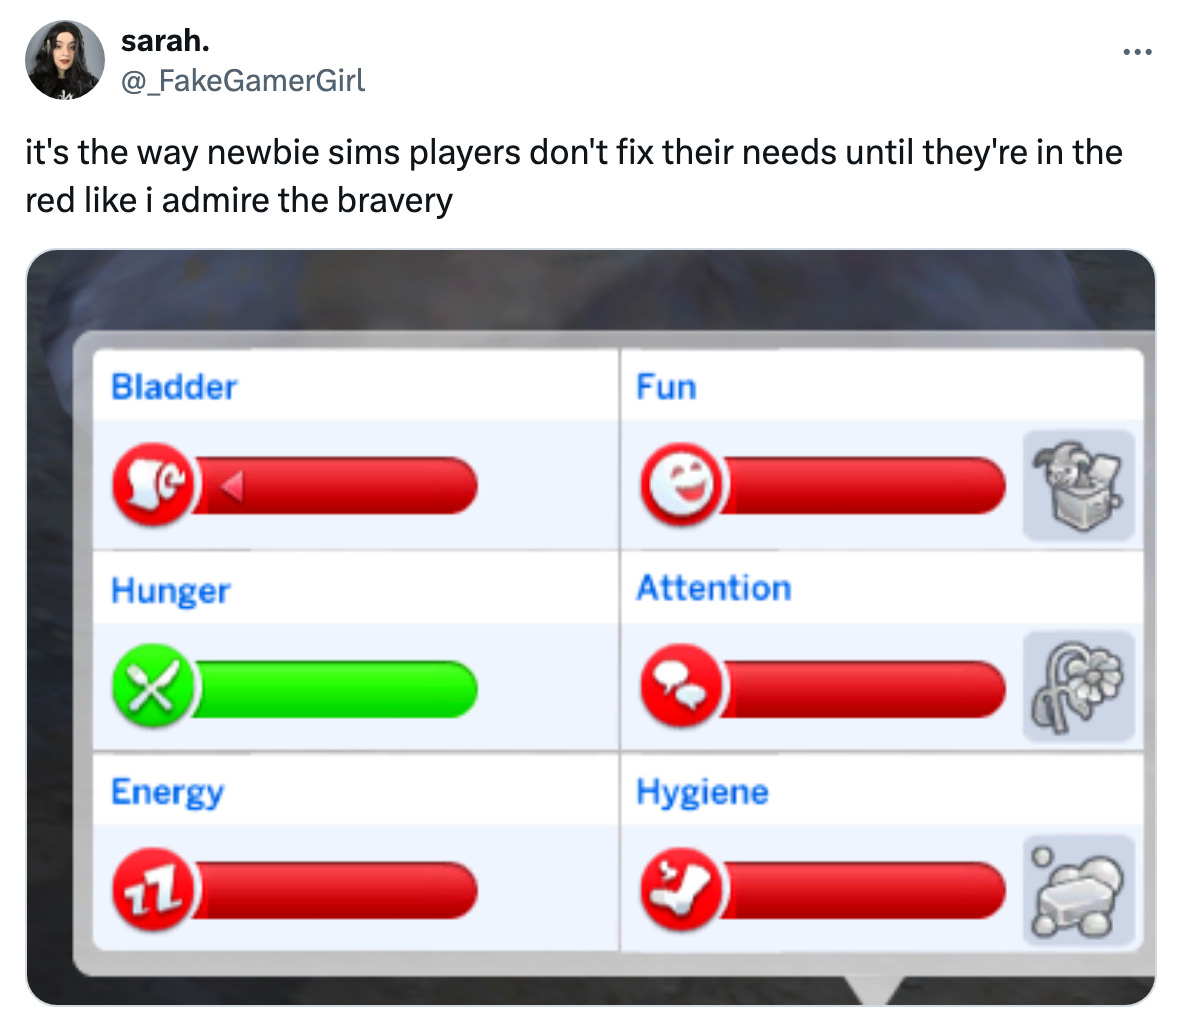 "it's the way newbie sims players don't fix their needs until they're in the red like i admire the bravery" - _fakegamergirl (twitter) [image of Sims bladder/hunger/energy/fun/attention/hygiene bars; all are fully depleted except hunger, which is fully restored)